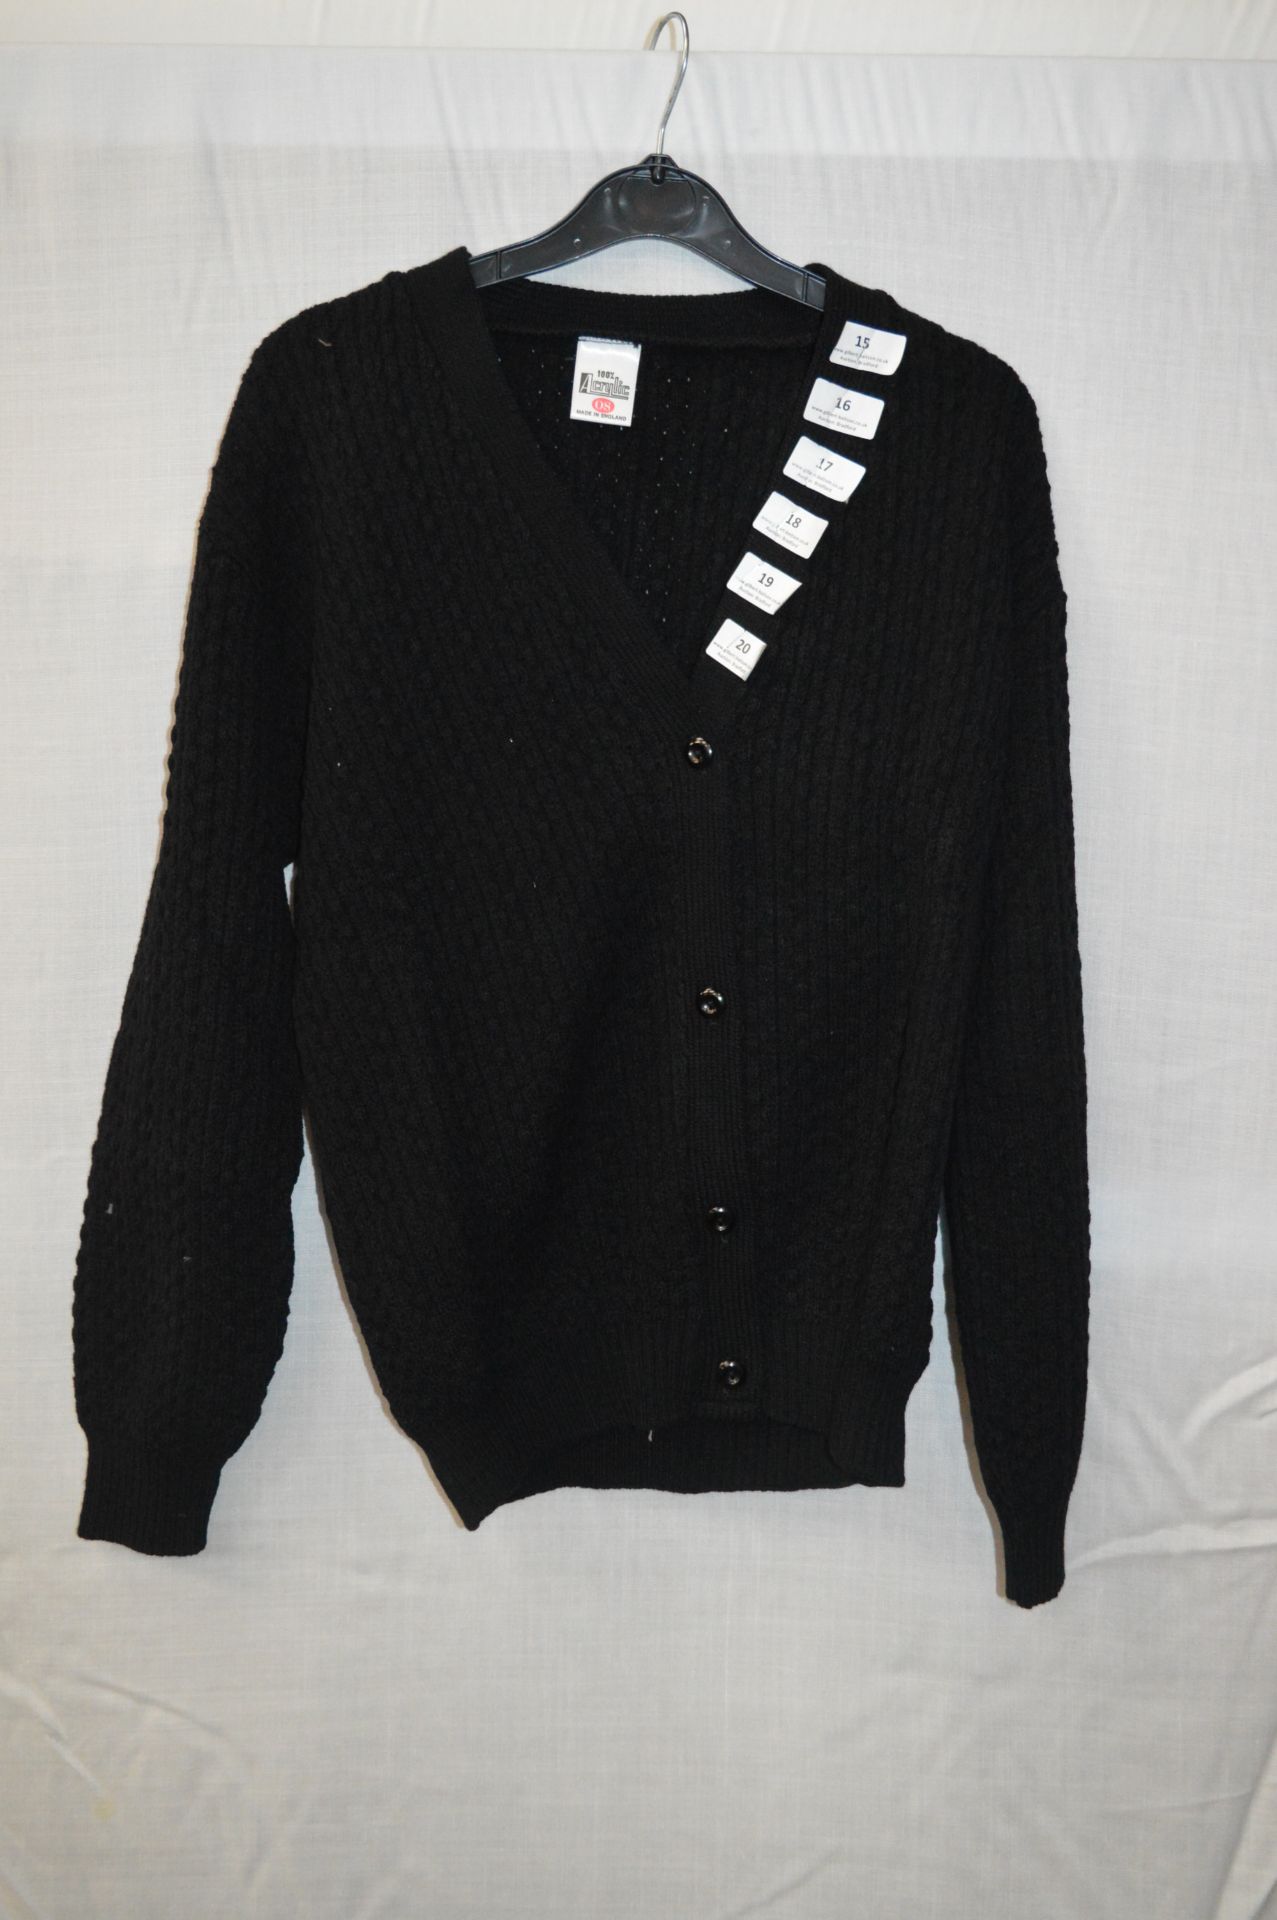 Box of Five Black Knitted Cardigans